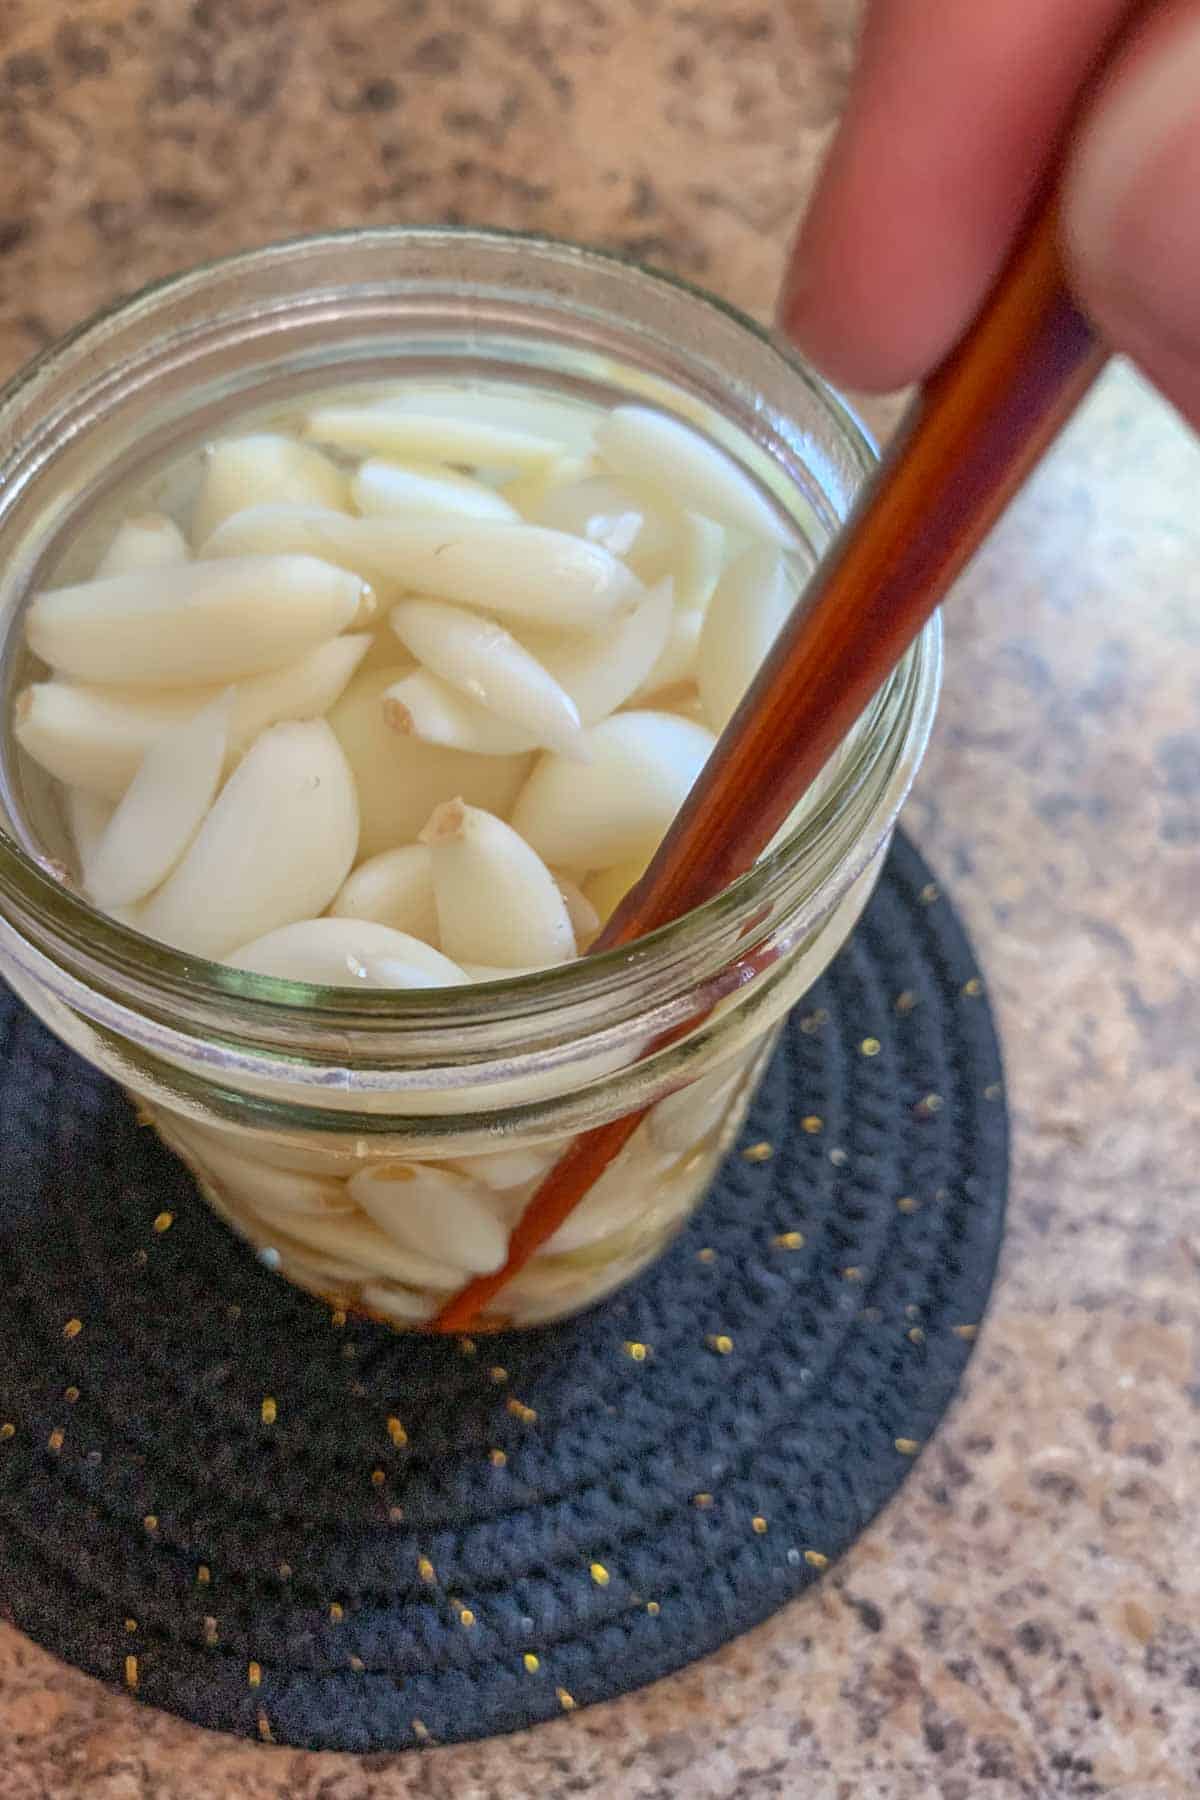 removing air bubbles in jar with chopstick